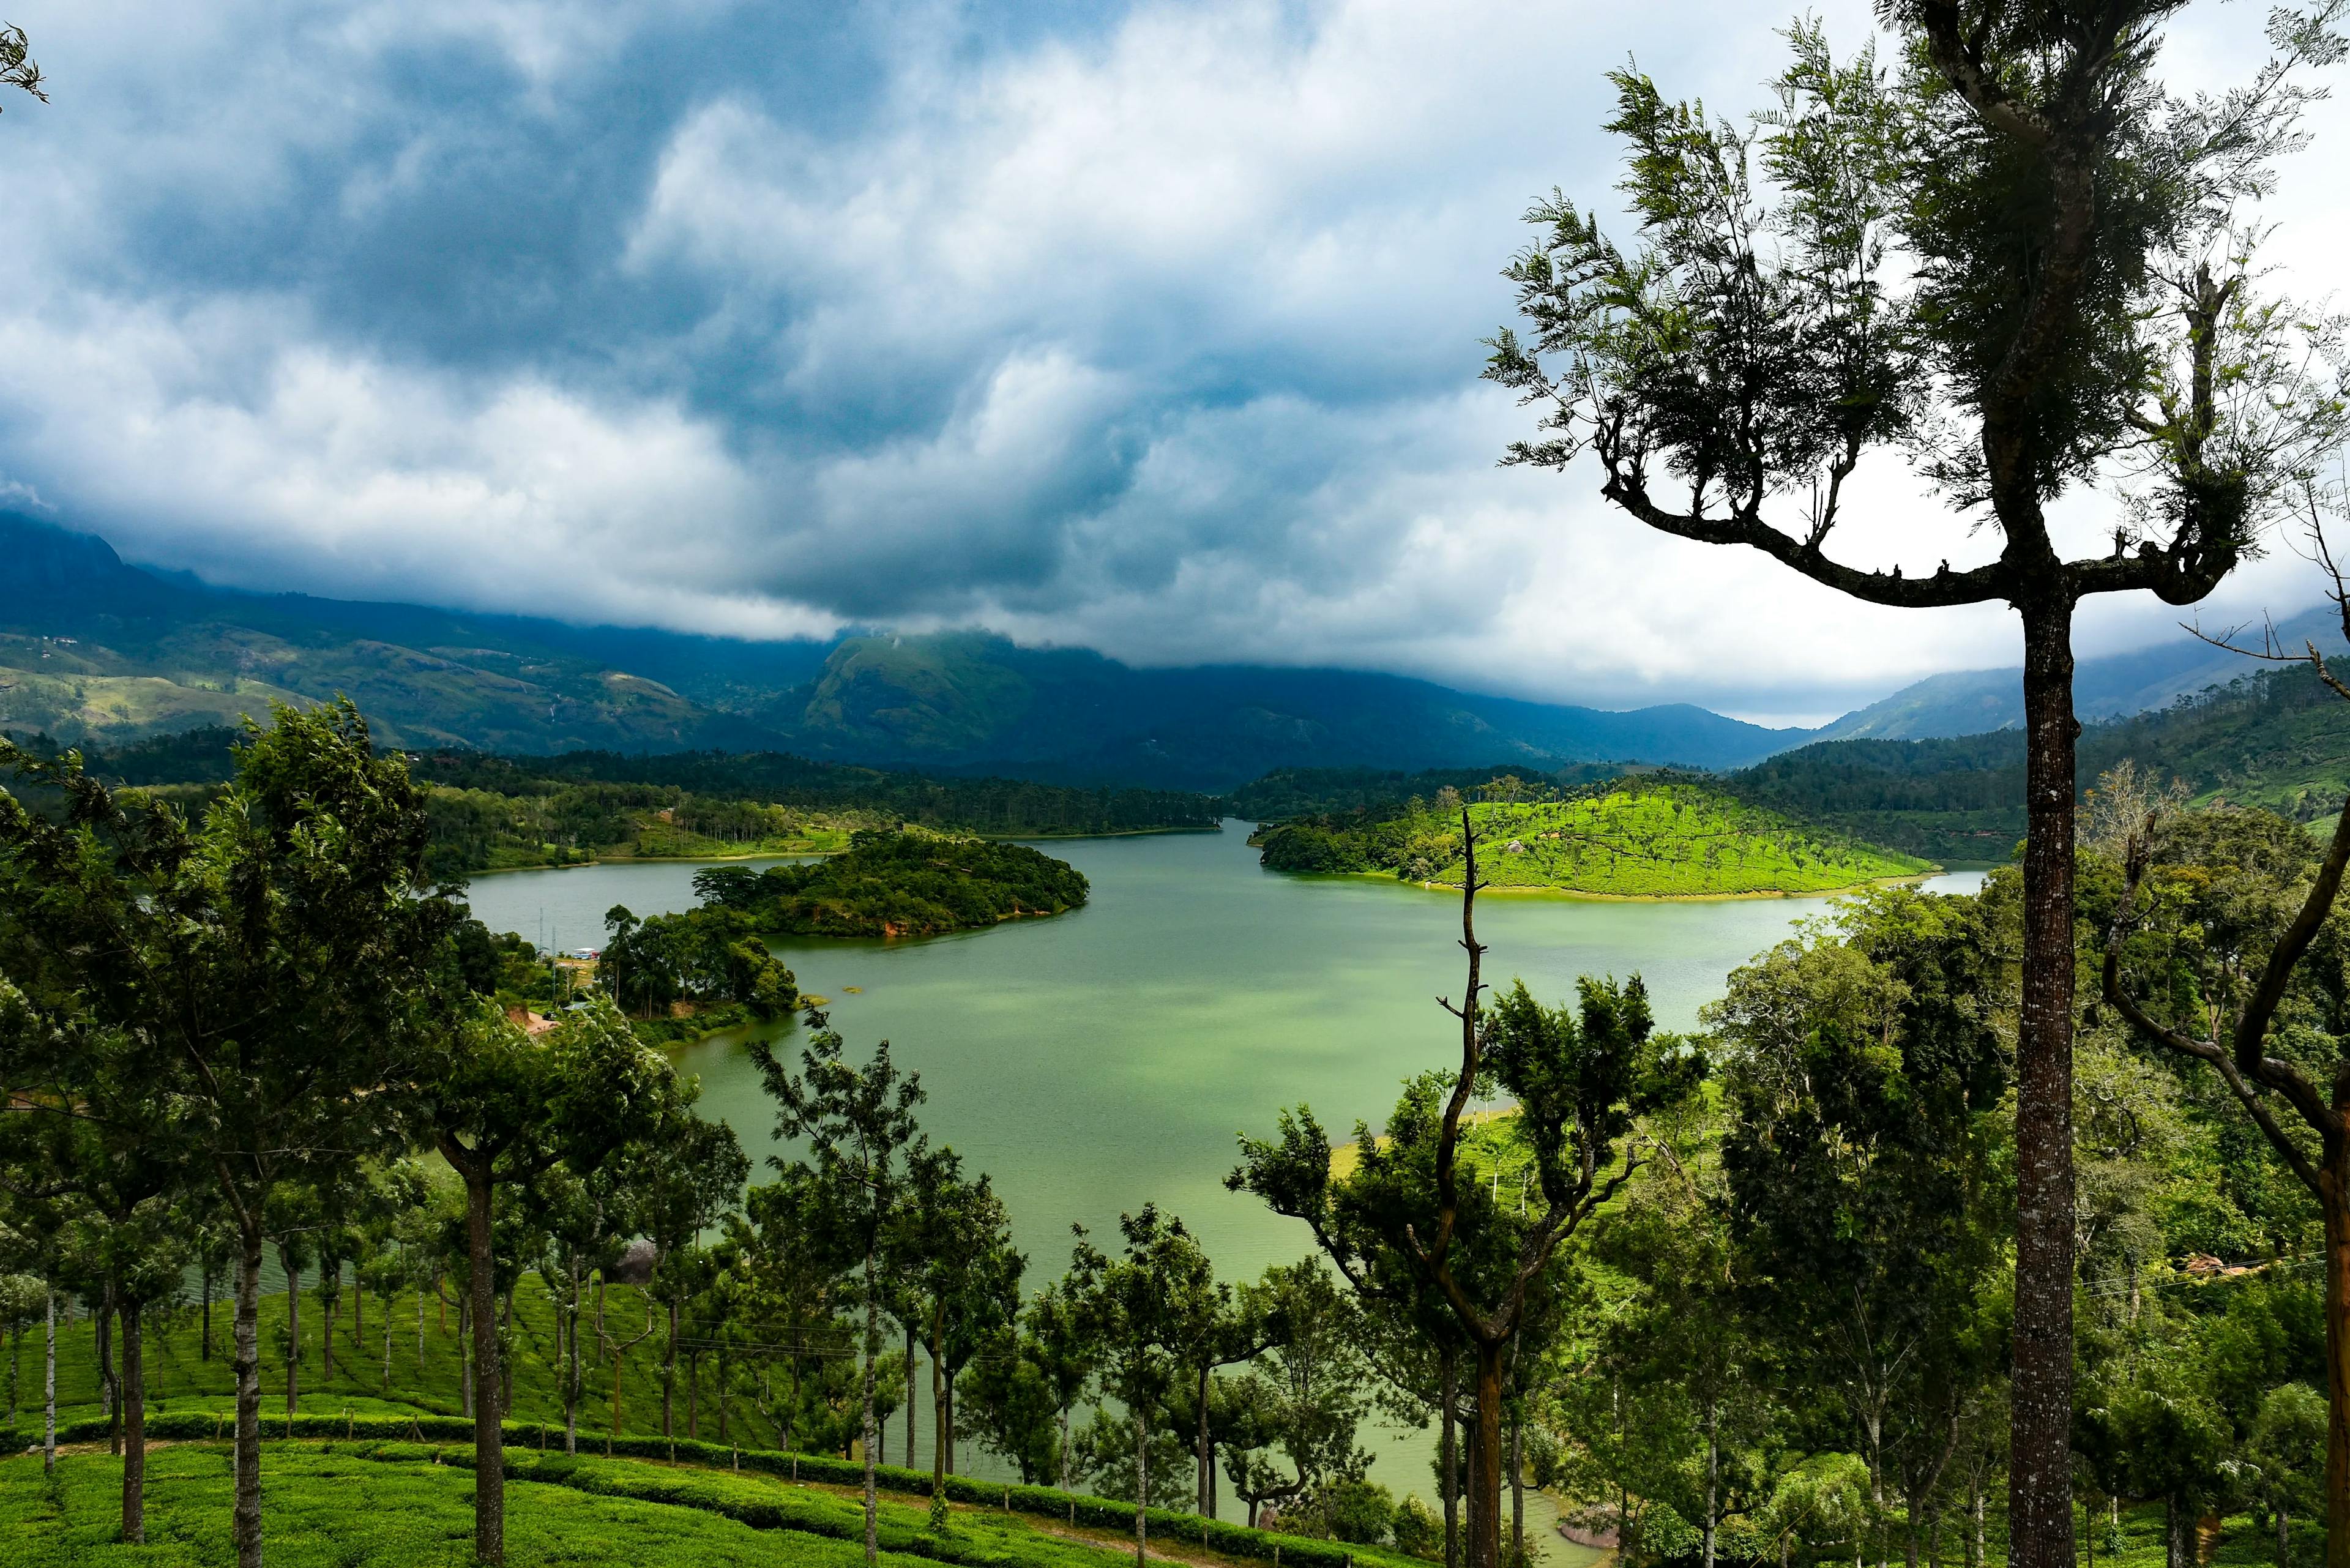 Munnar Tour: Discover the Paradise in Western Ghats Amidst Lush Green Hills from Bangalore